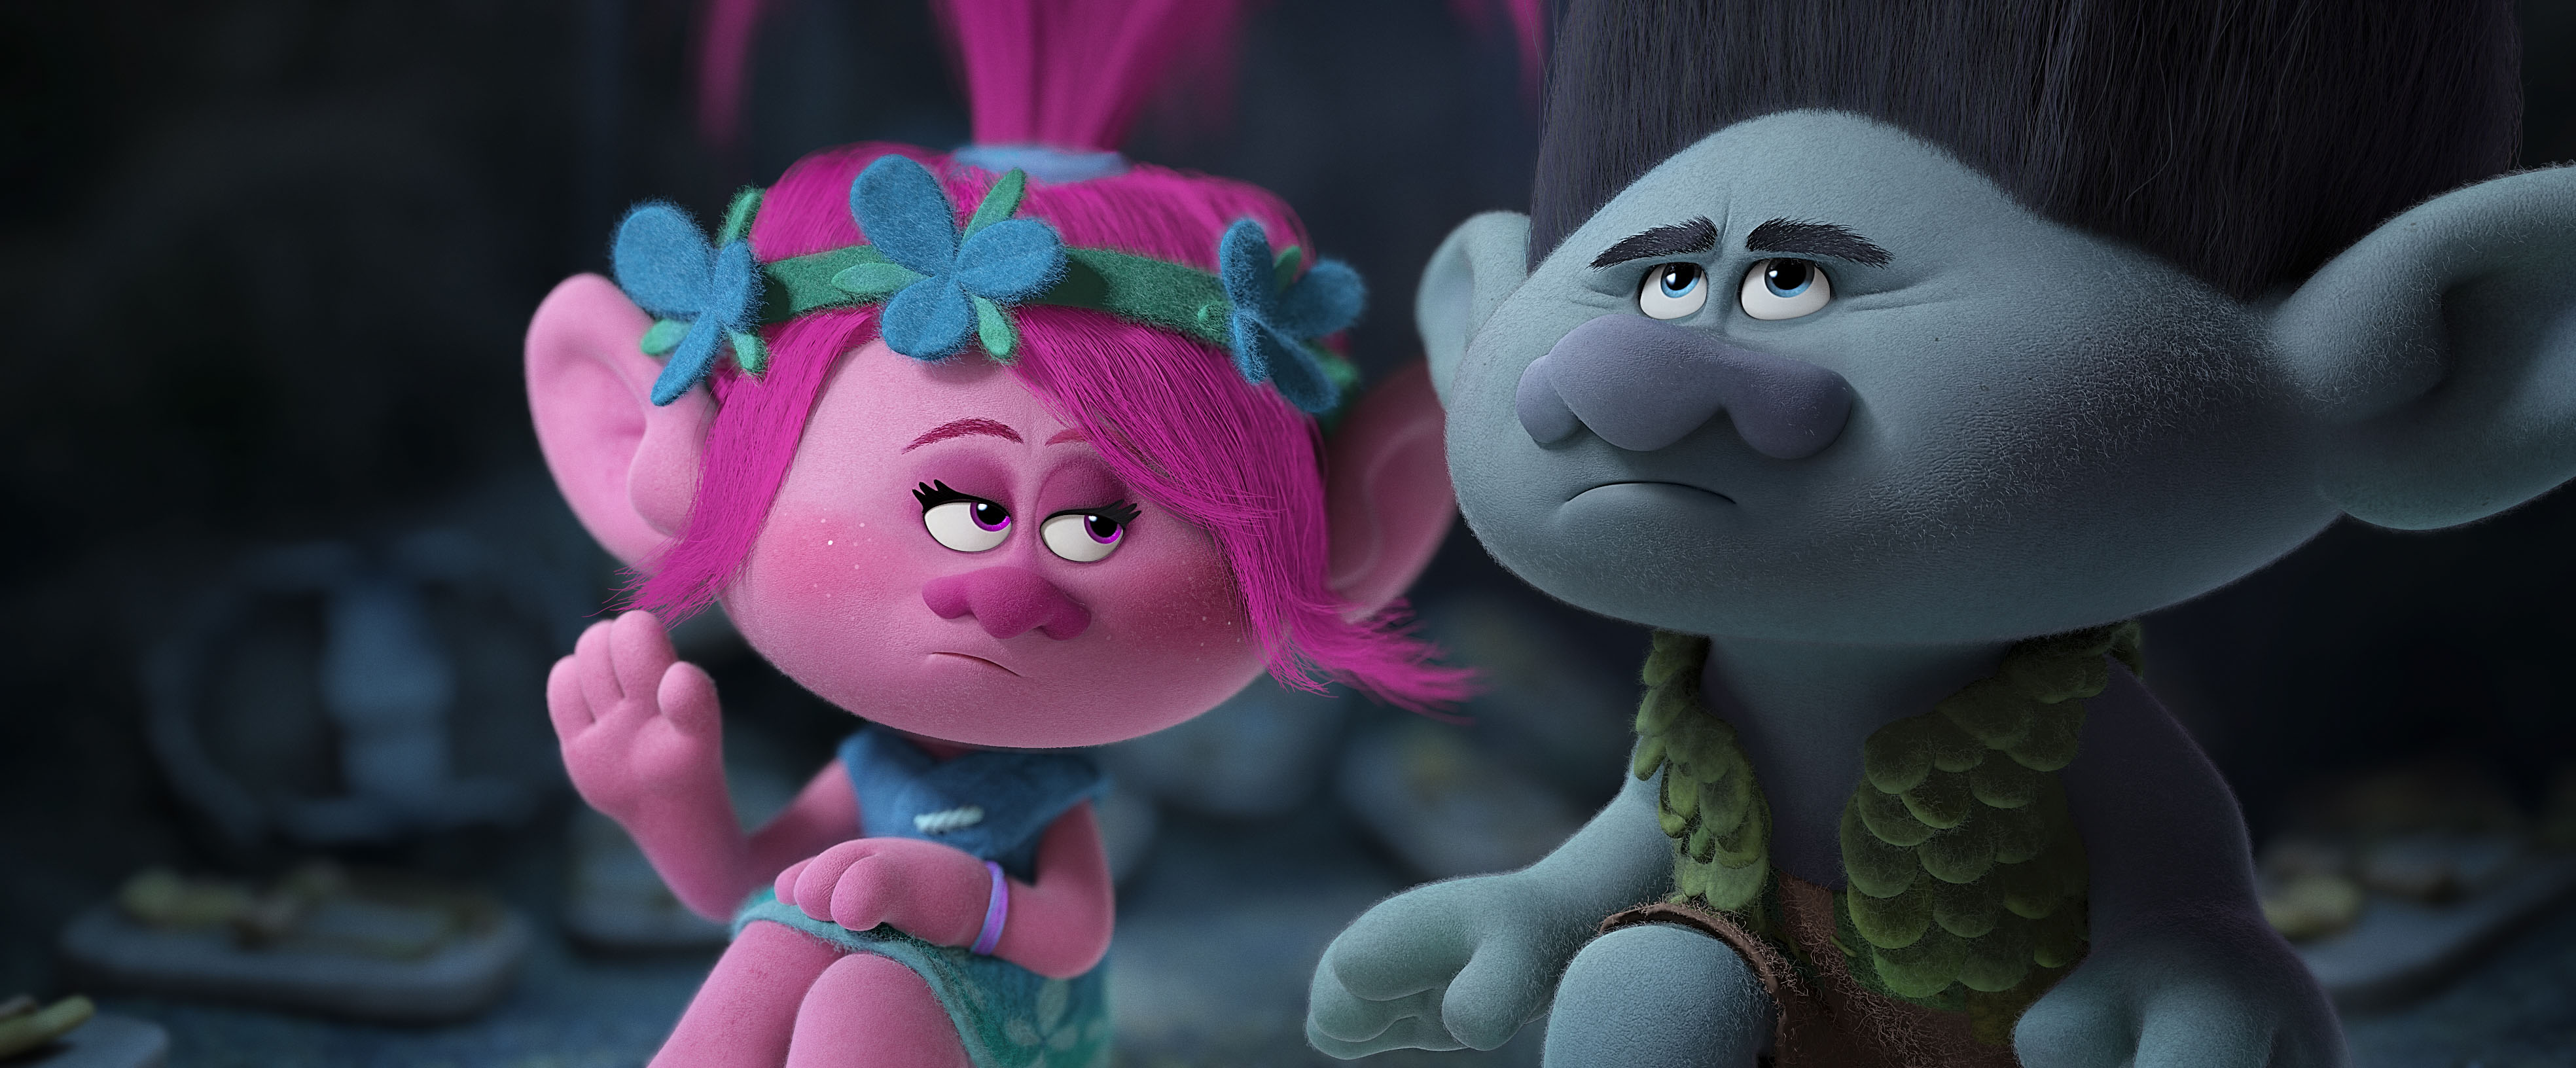 Anna Kendrick & Justin Timberlake Sing Themselves Silly In Dreamworks  Animation's 'Trolls' [BFI London Film Fest Review]